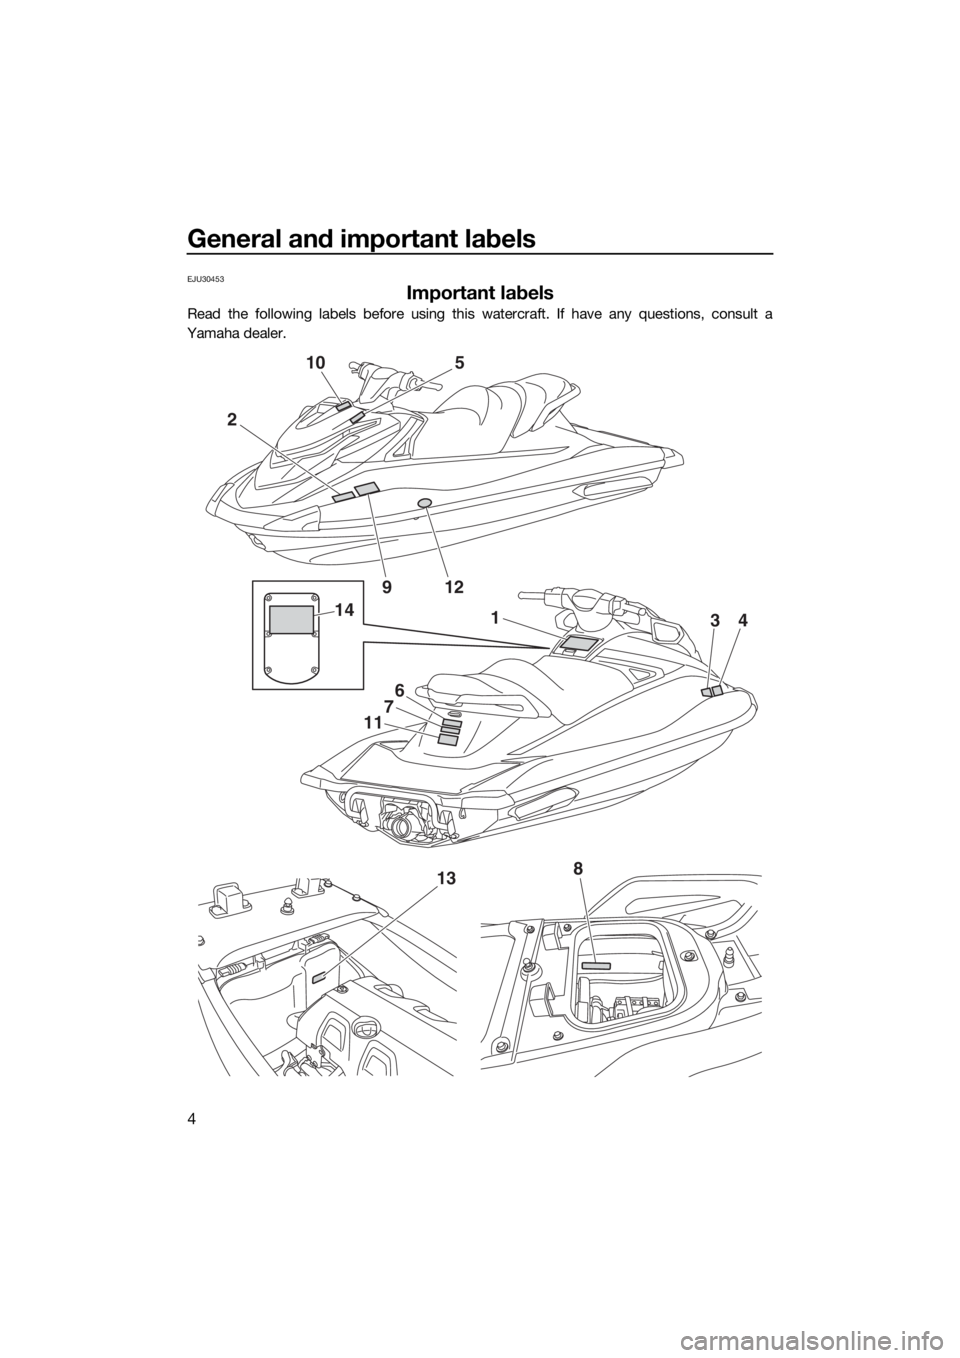 YAMAHA VXR 2017  Owners Manual General and important labels
4
EJU30453
Important labels
Read the following labels before using this watercraft. If have any questions, consult a
Yamaha dealer.
2
10
1
6
7
11
34
5
912
14
813
UF2W73E0.